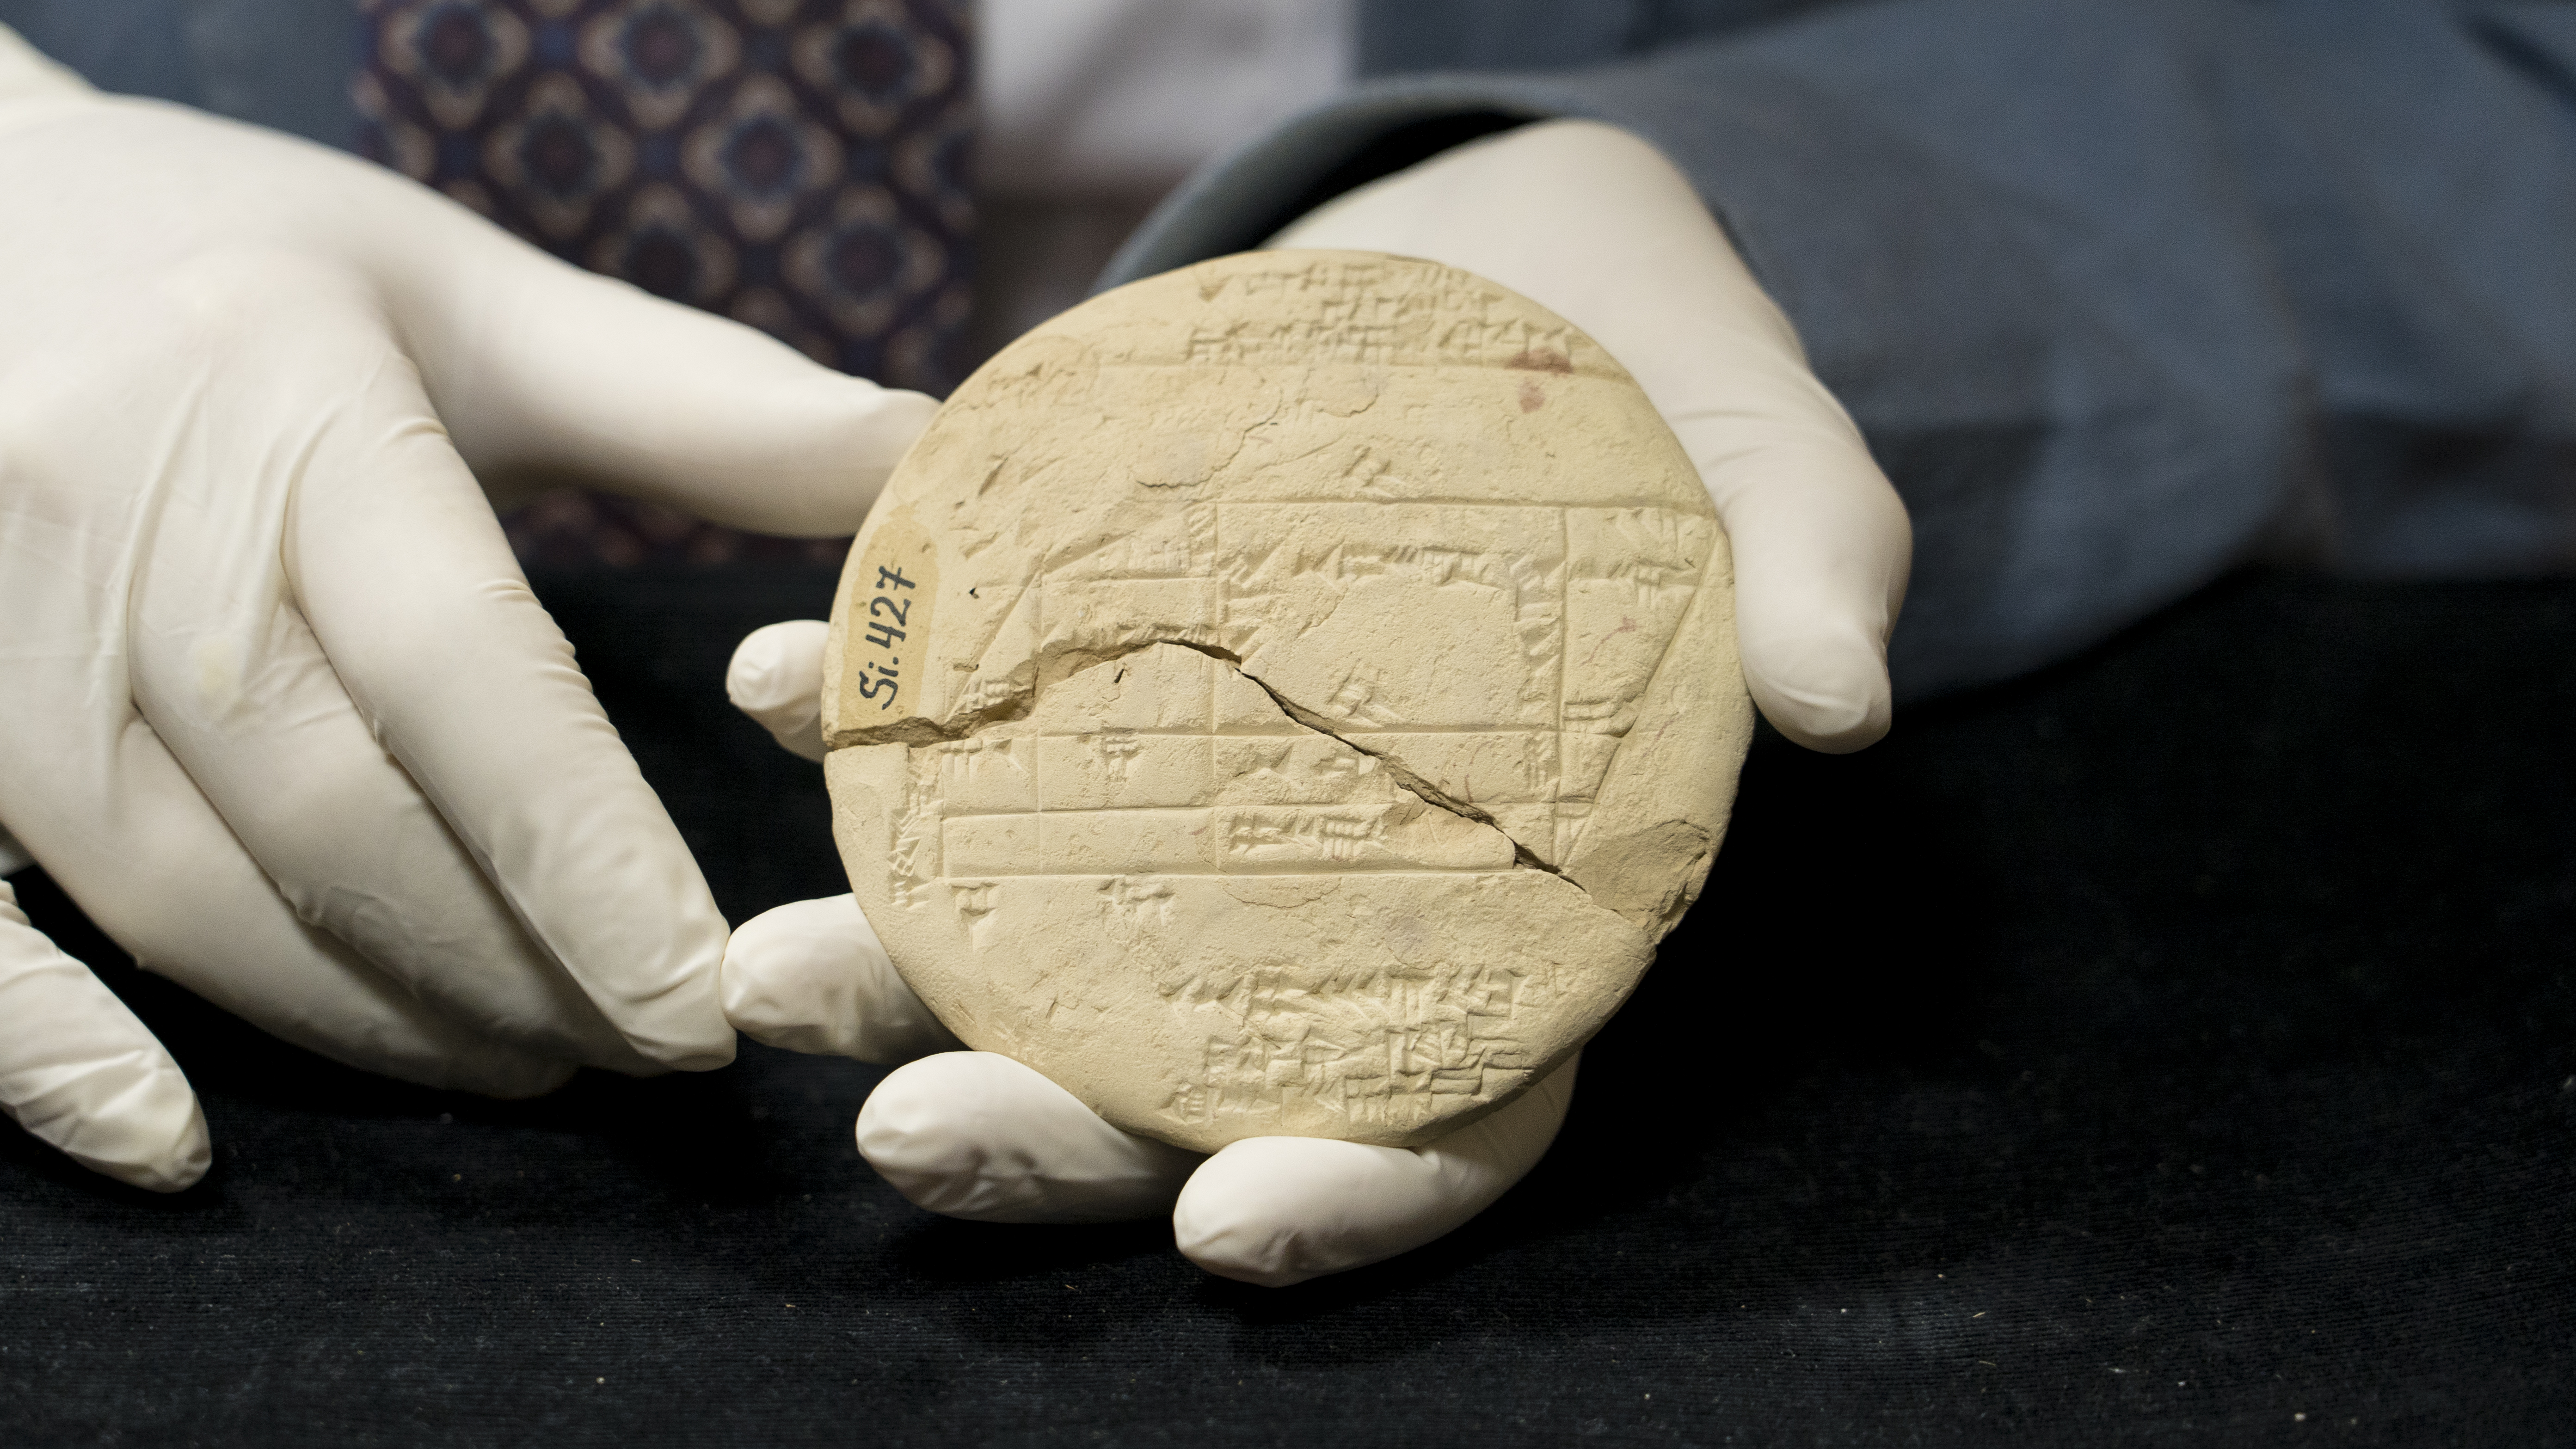 Si.427 is a hand tablet from 1900-1600 BC, created by an Old Babylonian surveyor. It’s made out of clay and the surveyor wrote on it with a stylus. Credit: UNSW Sydney